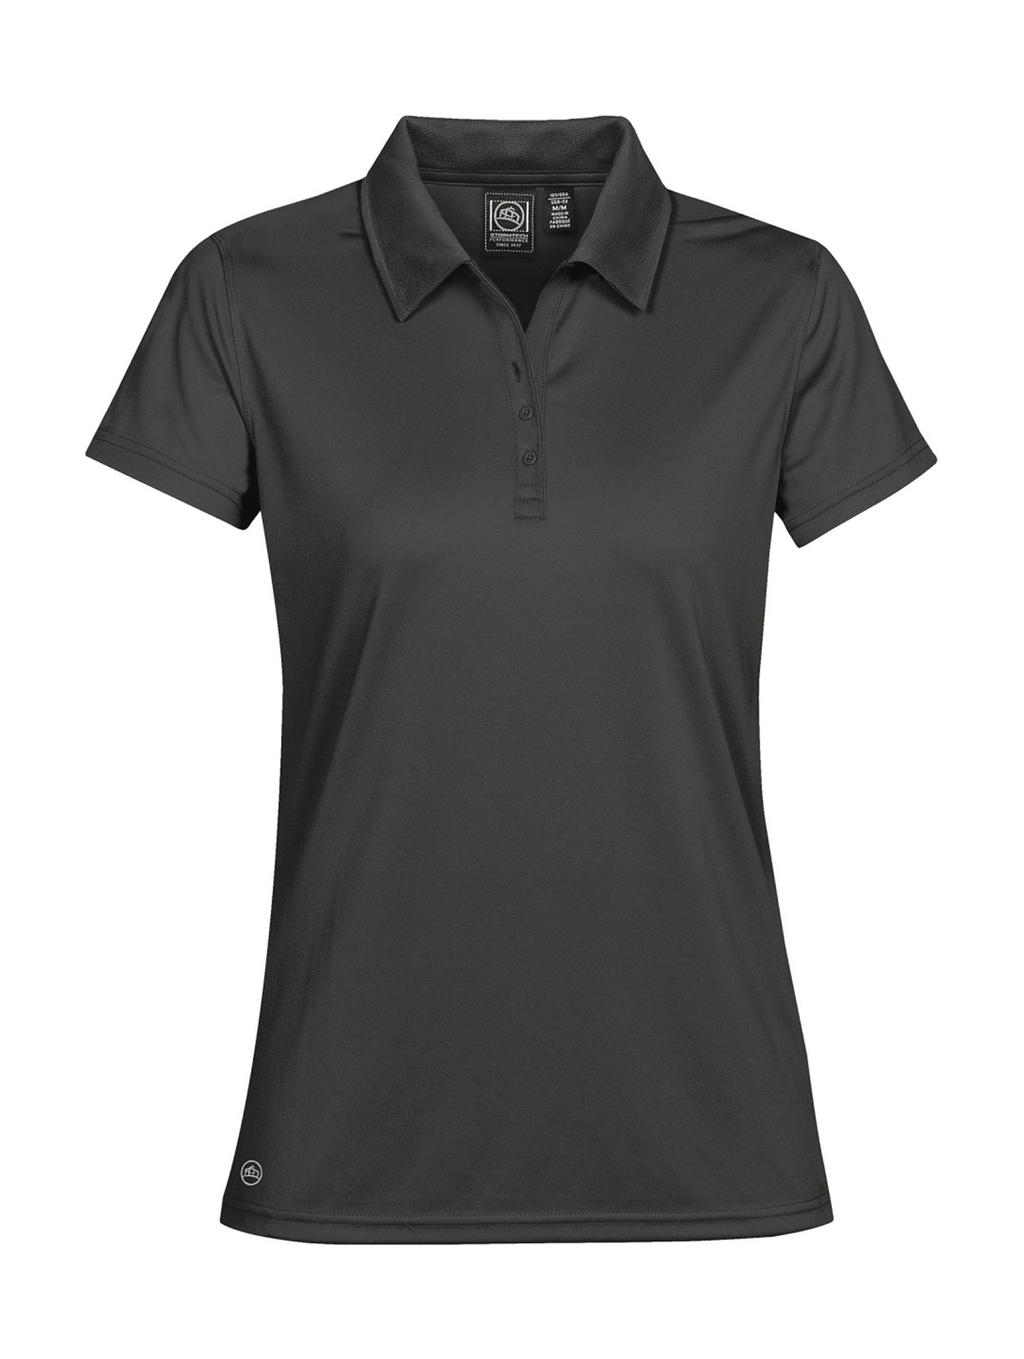  Stormtech Womens H2X DRY Polo in Farbe Carbon